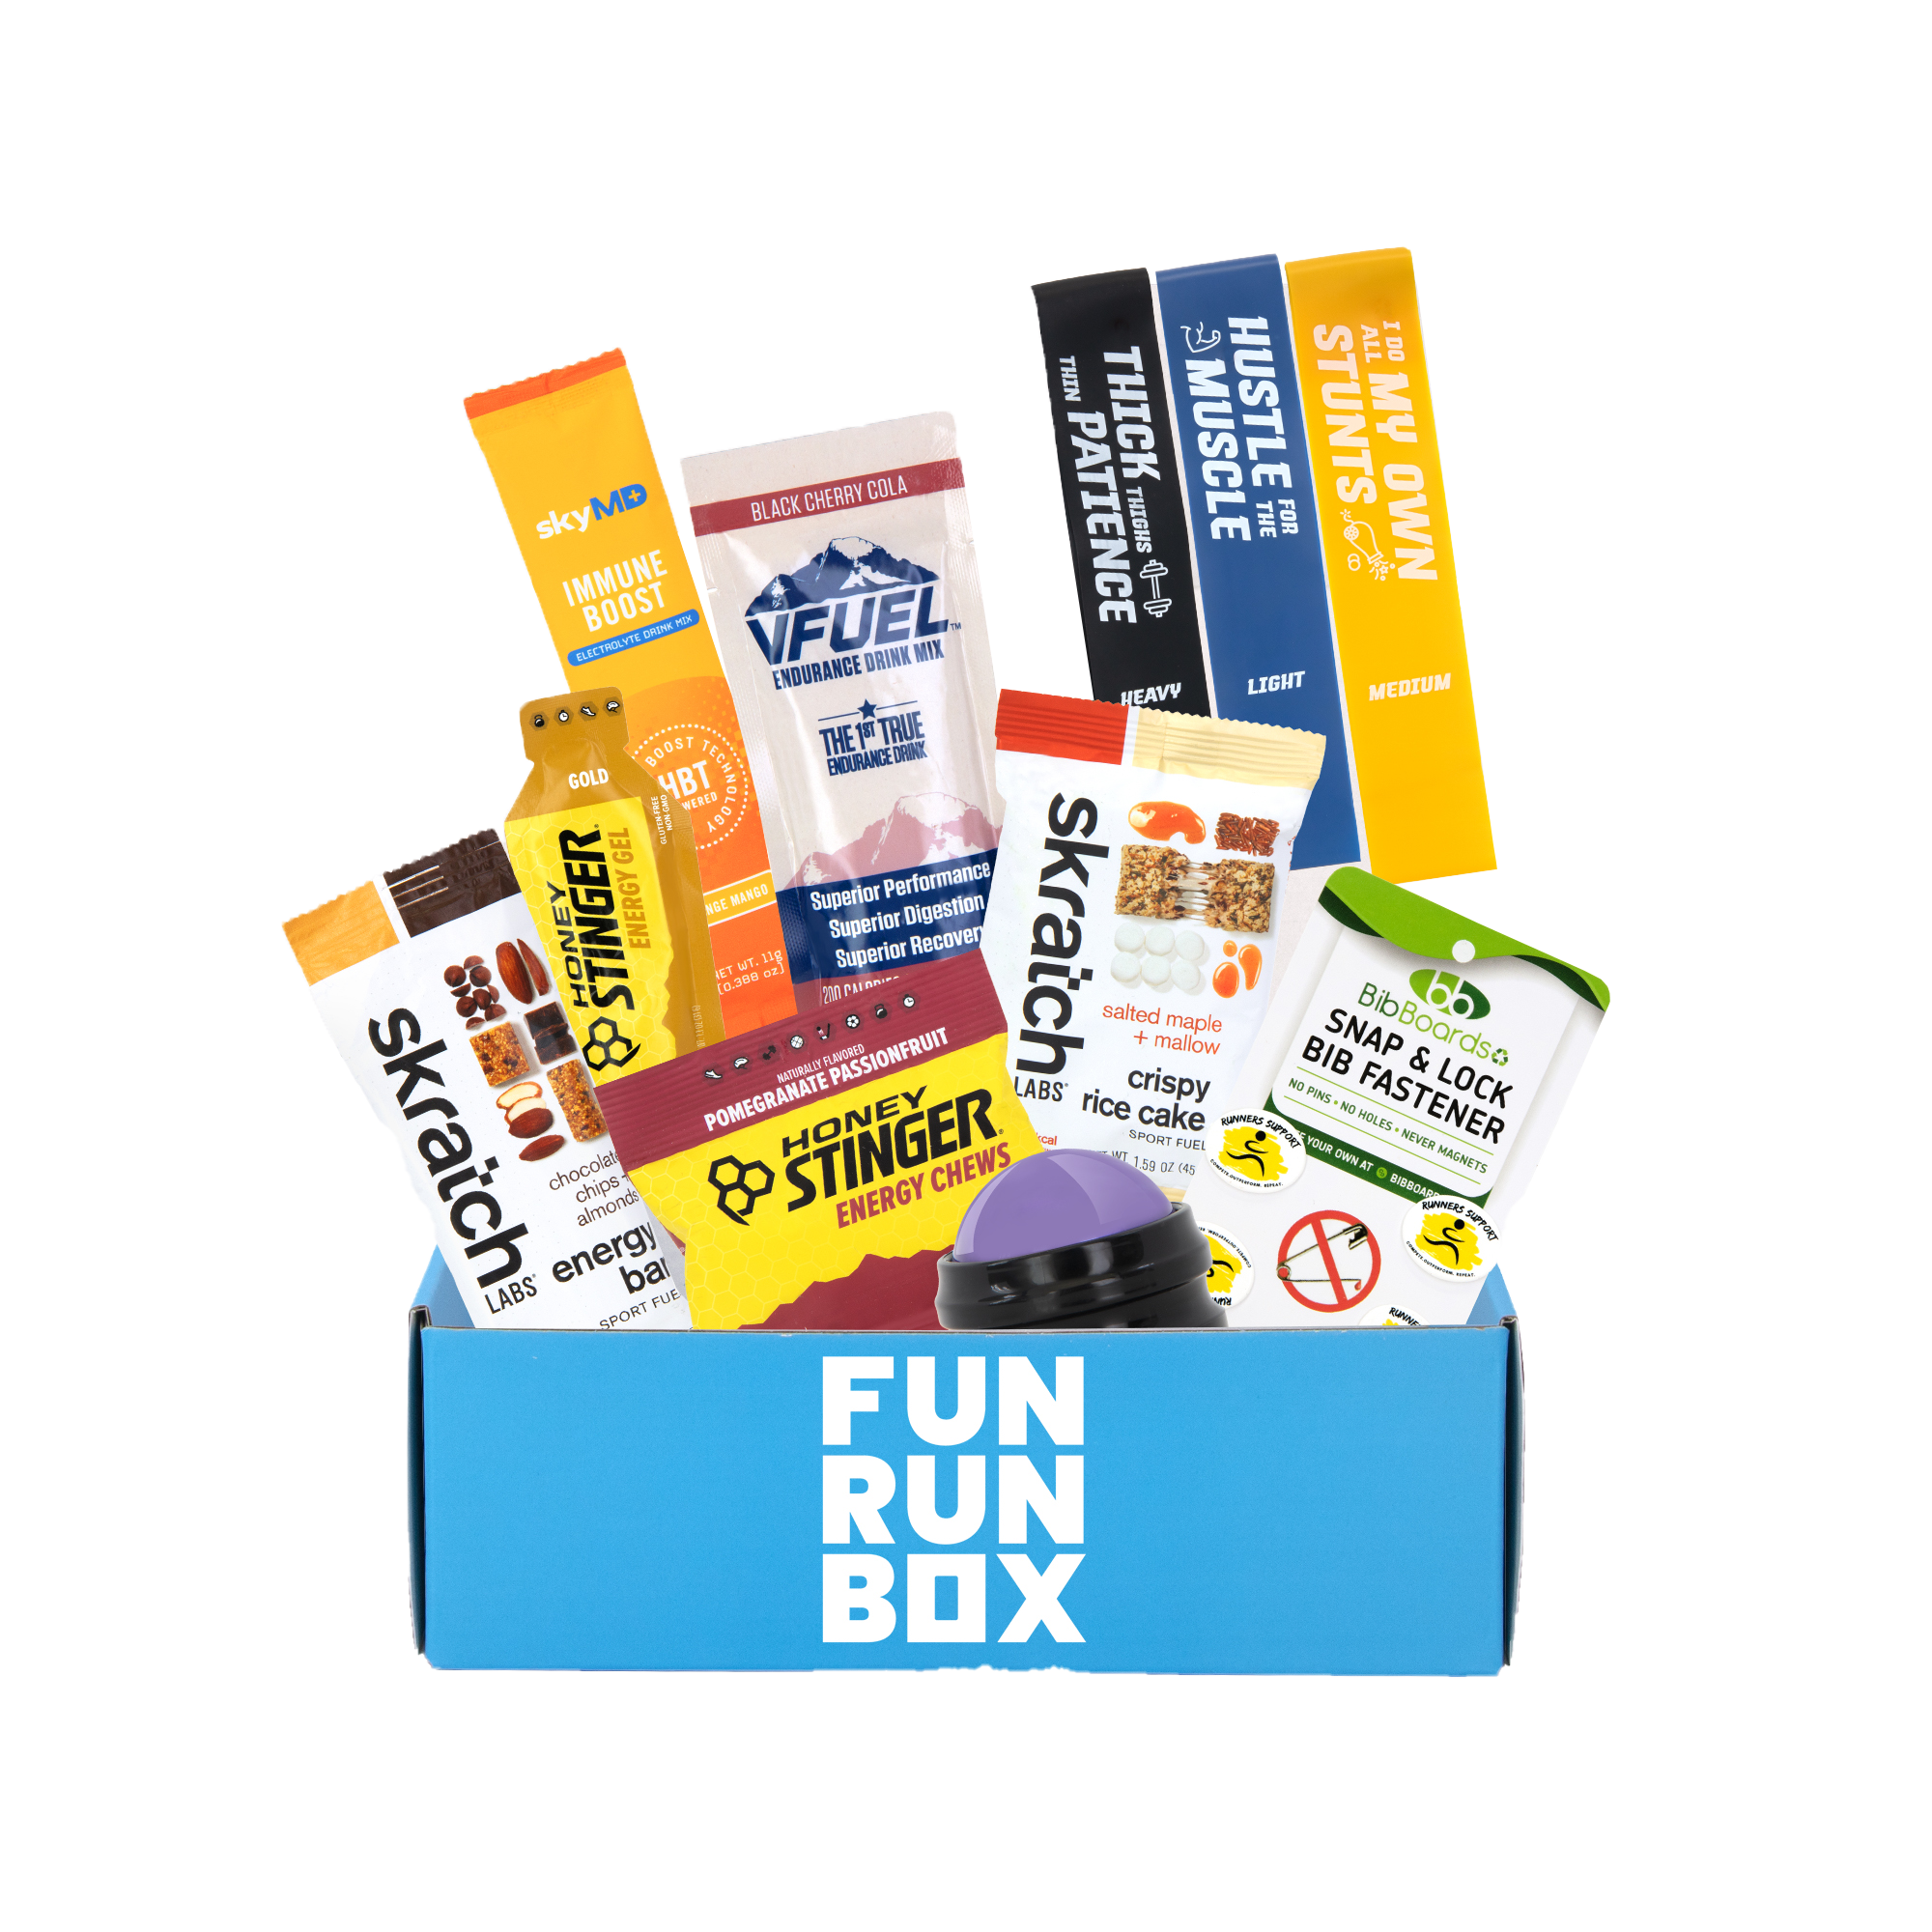 FRB Monthly Runners Box - 6 Month Plan